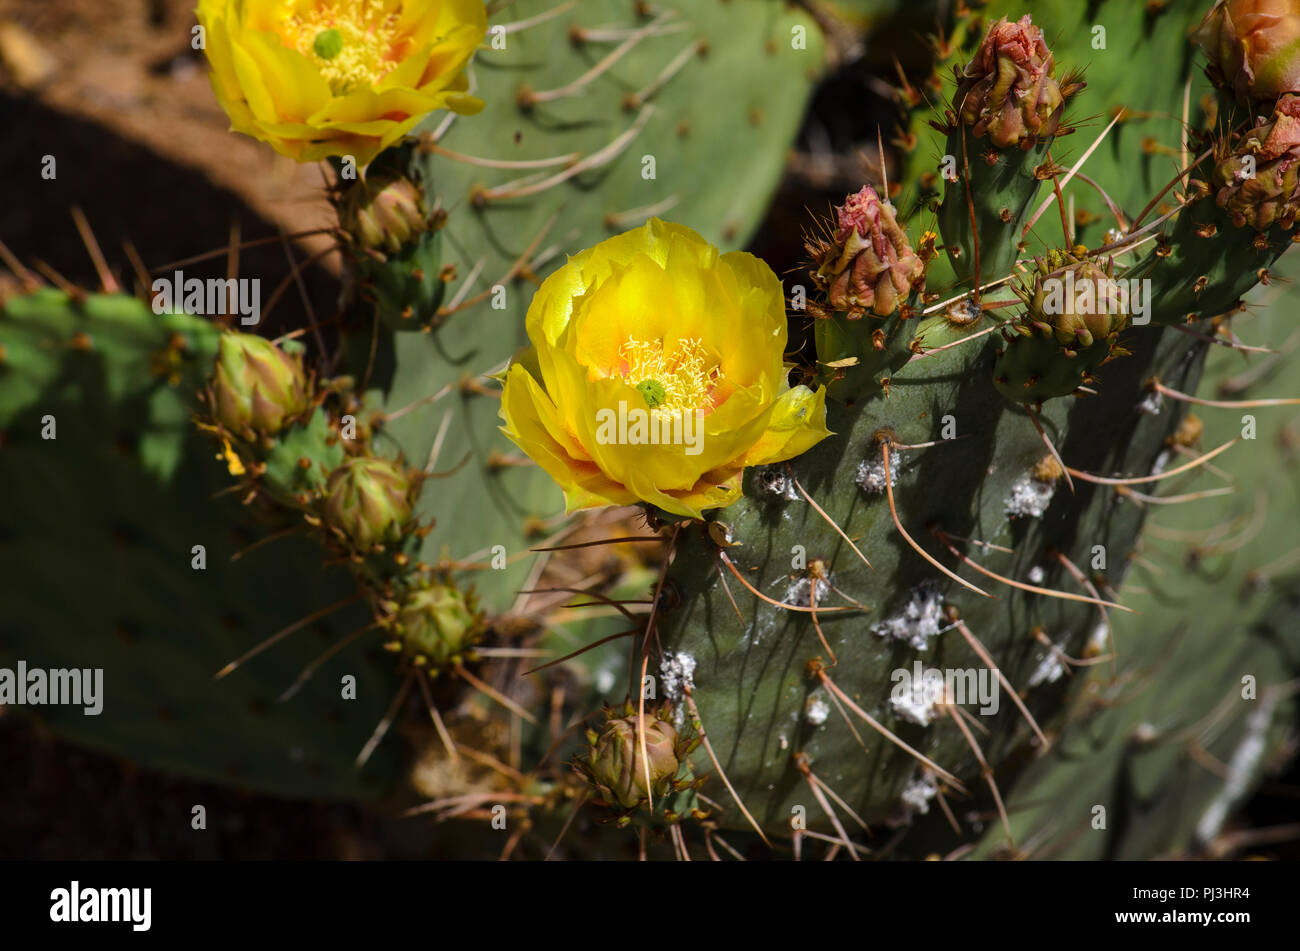 Prickly pear cactus in bloom with yellow flowers. Stock Photo